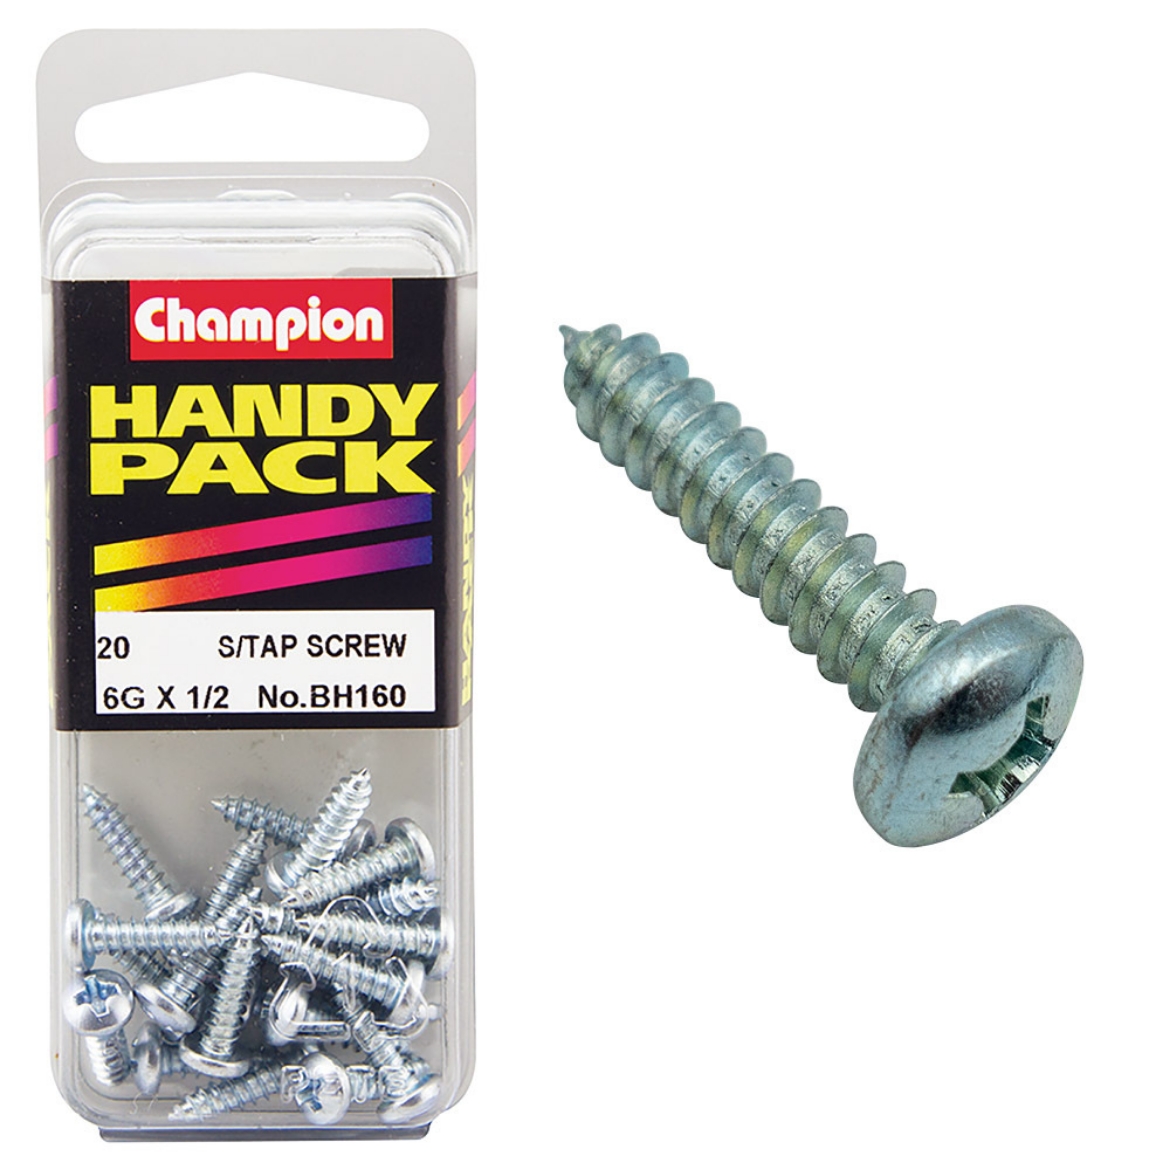 Picture of Handy Pk Self Tap Screw pan head 6g x 1/2 CST (Pkt.20)